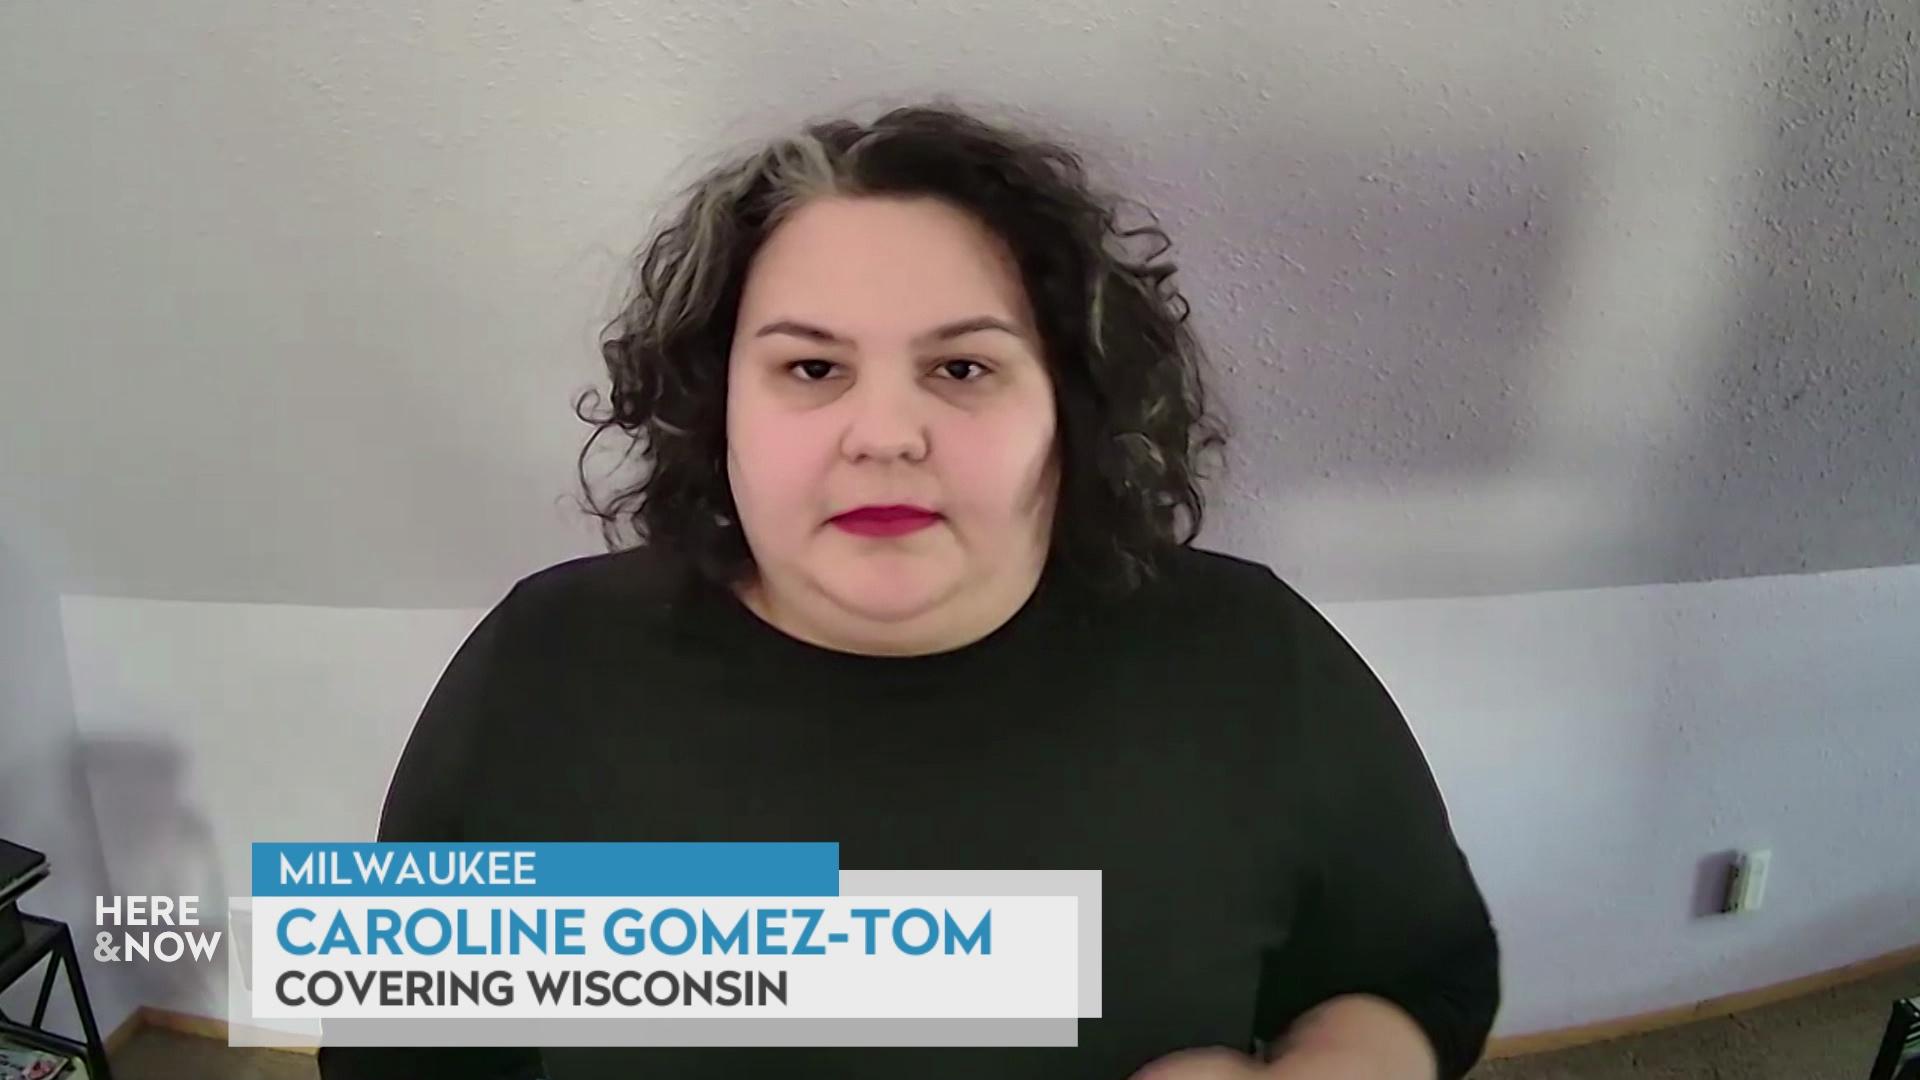 A still image from a video shows Caroline Gomez-Tom seated with a graphic at bottom reading 'Milwaukee,' 'Caroline Gomez-Tom' and 'Covering Wisconsin.'